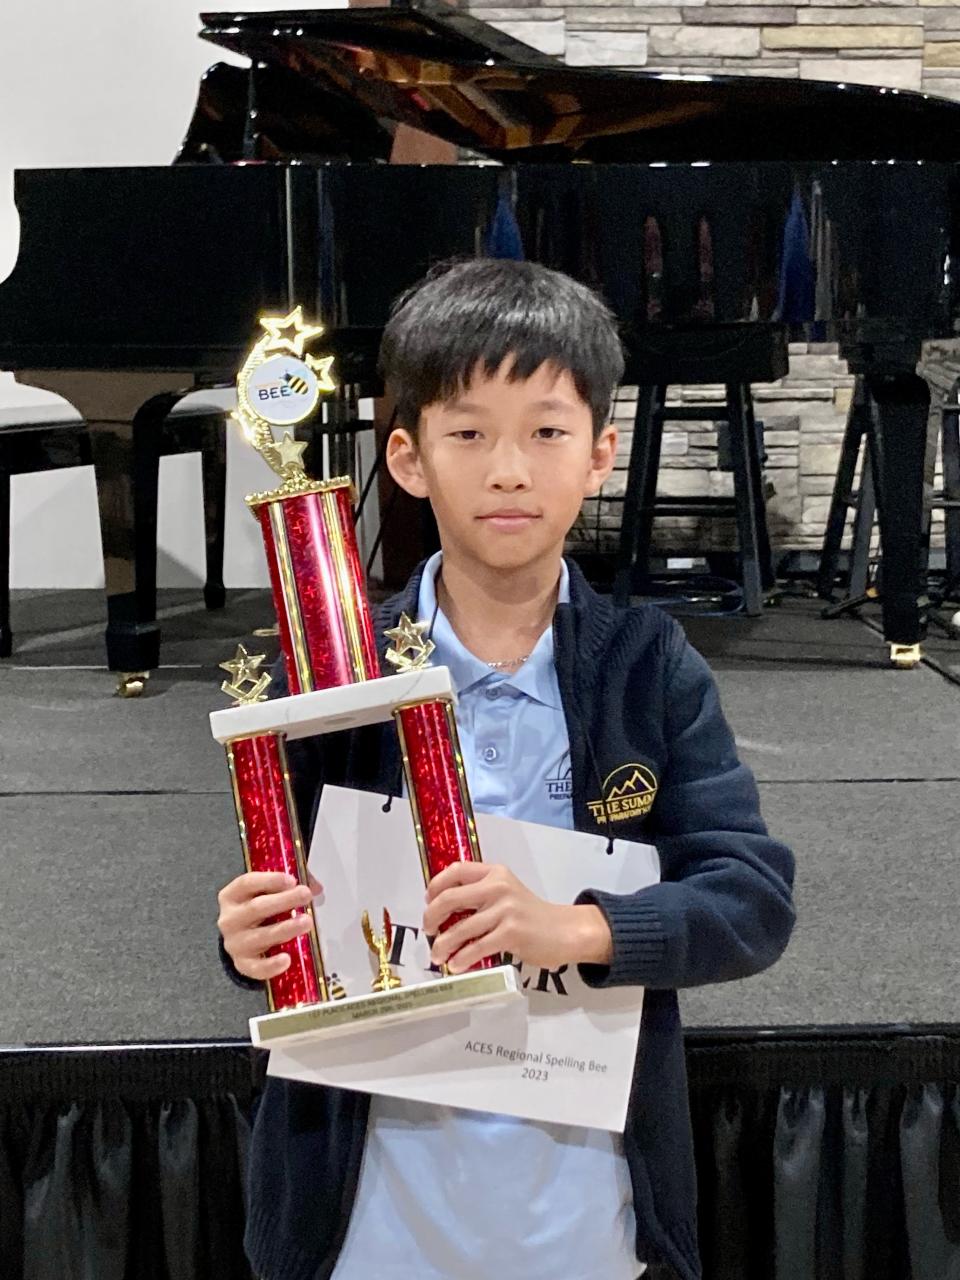 Tyler Tang won the March 2023 Regional Spelling Bee in Rolla, which made him eligible to compete for the Scripps National Spelling Bee.